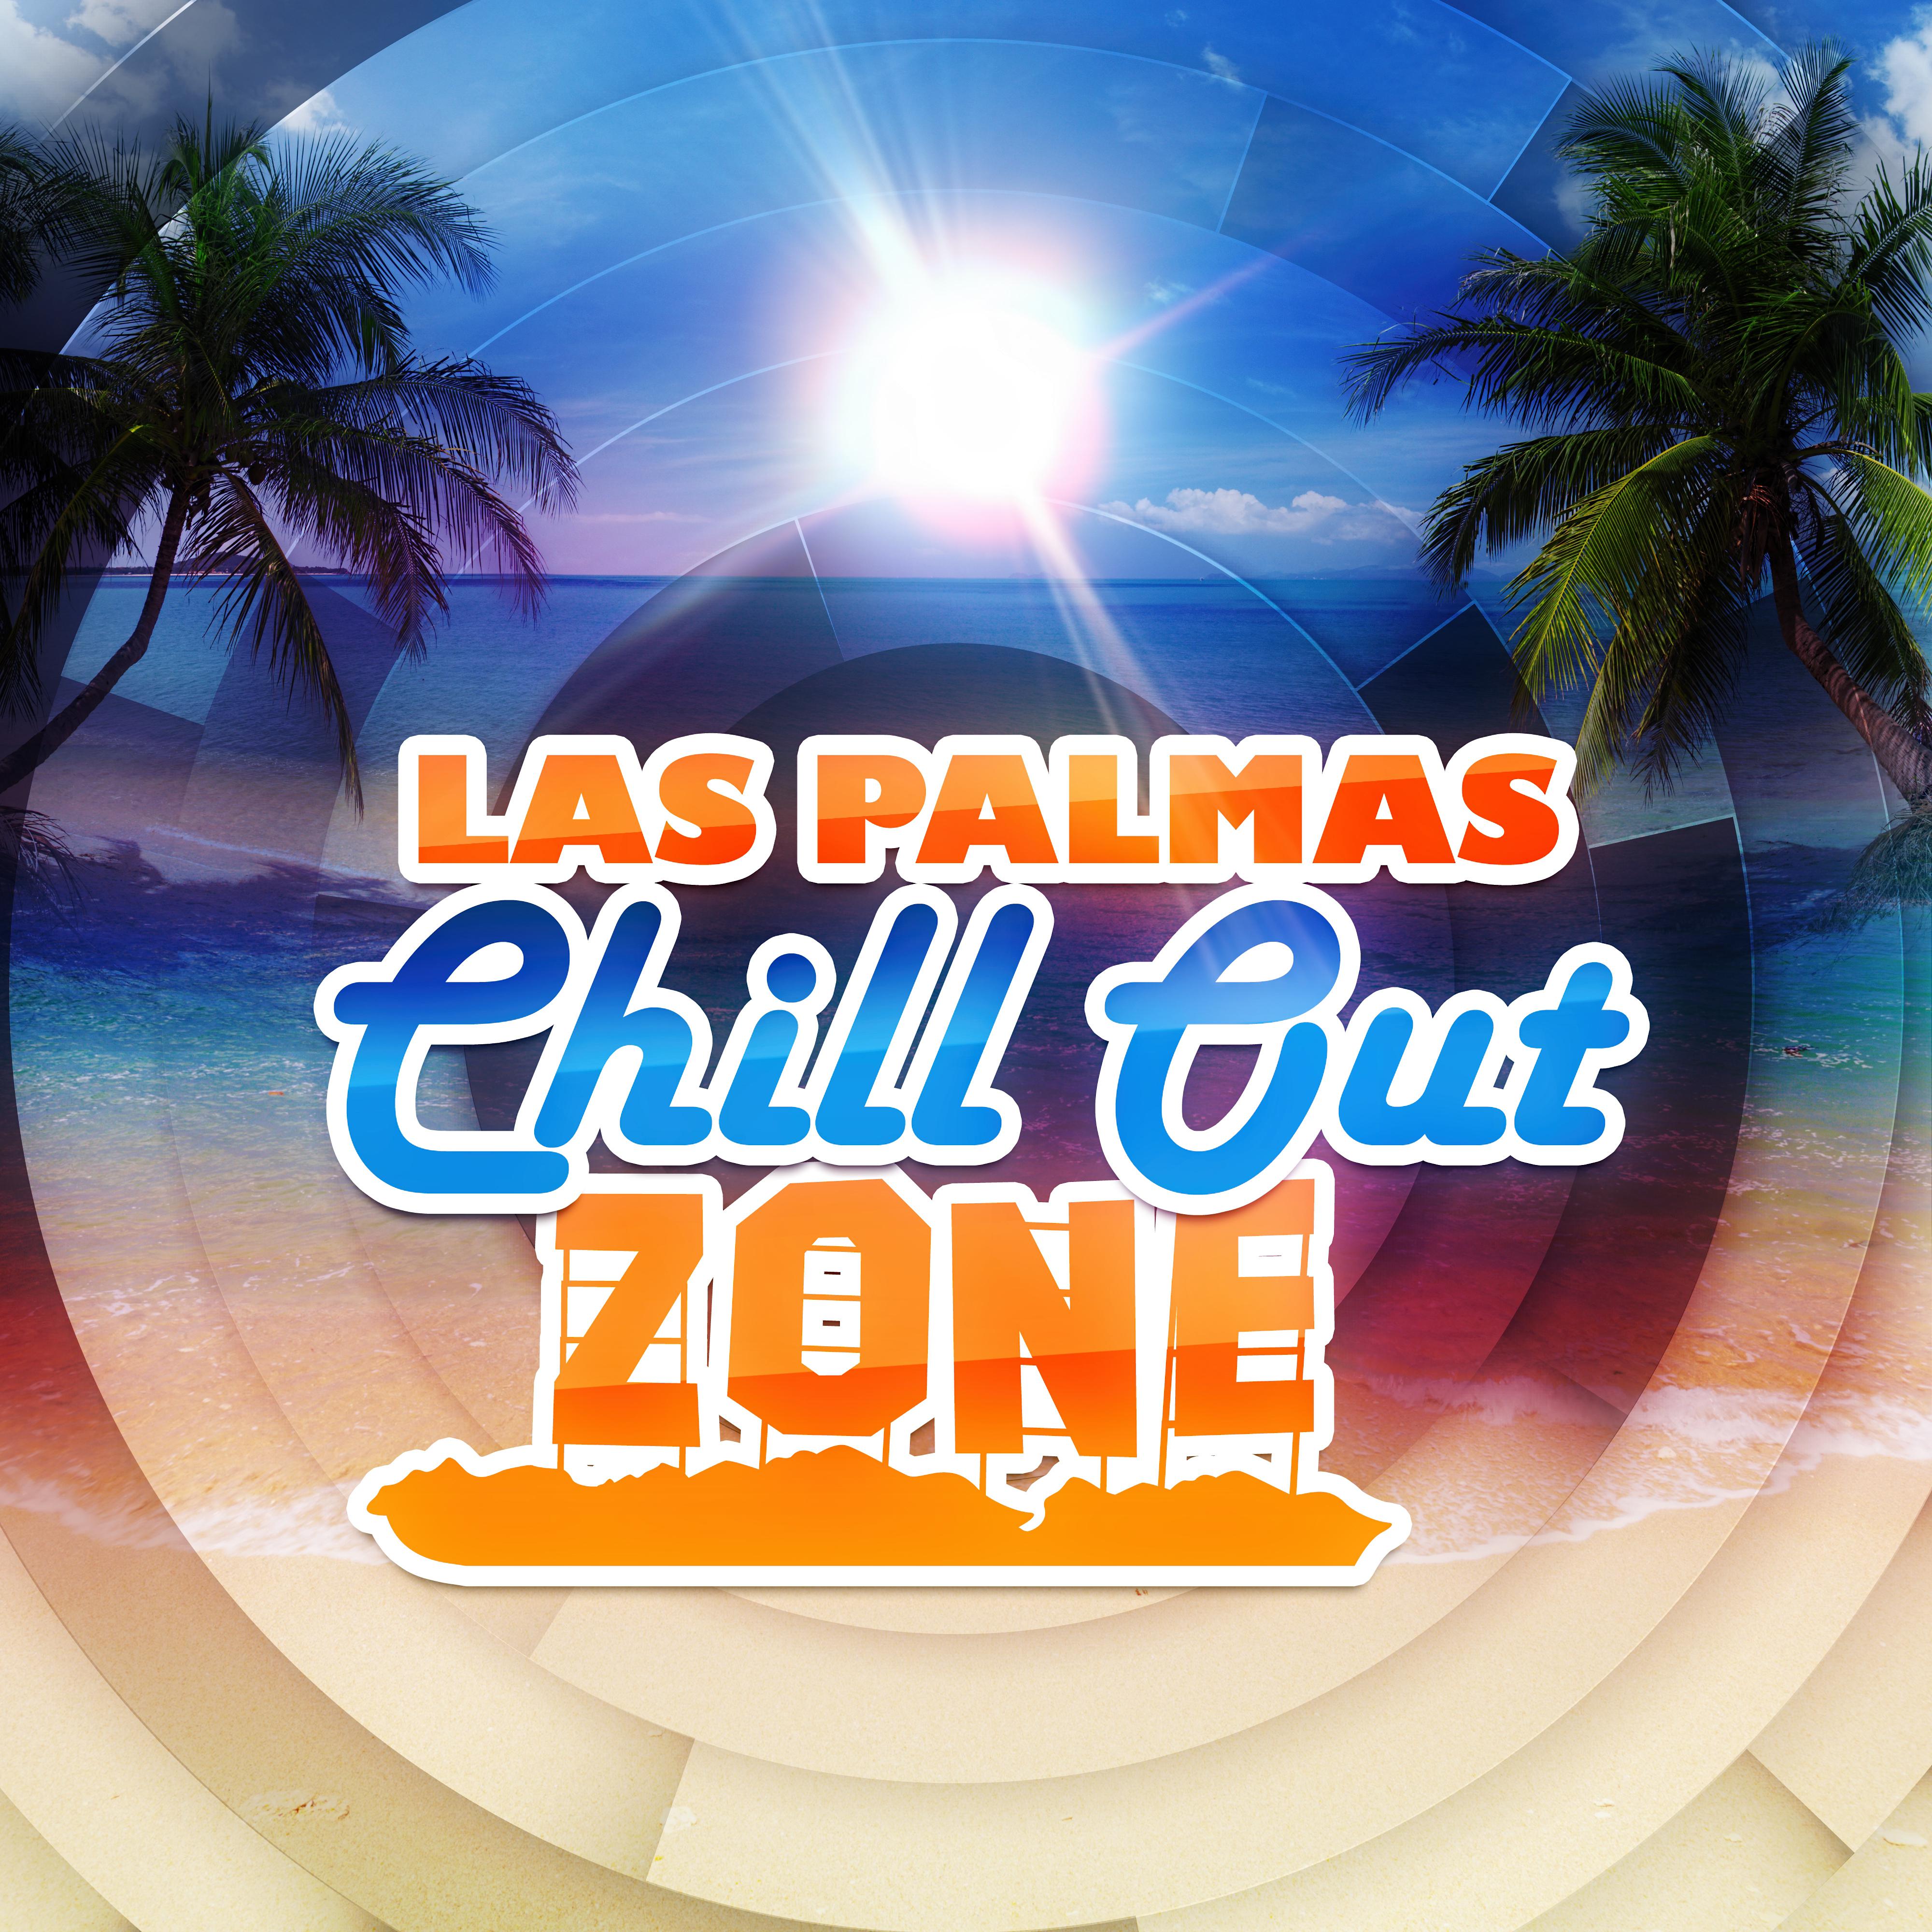 Las Palmas Chill Out Zone - Infinite Love, Solstice, Soulful, Lounge Music, Finest Chill Out, Relaxing Sounds